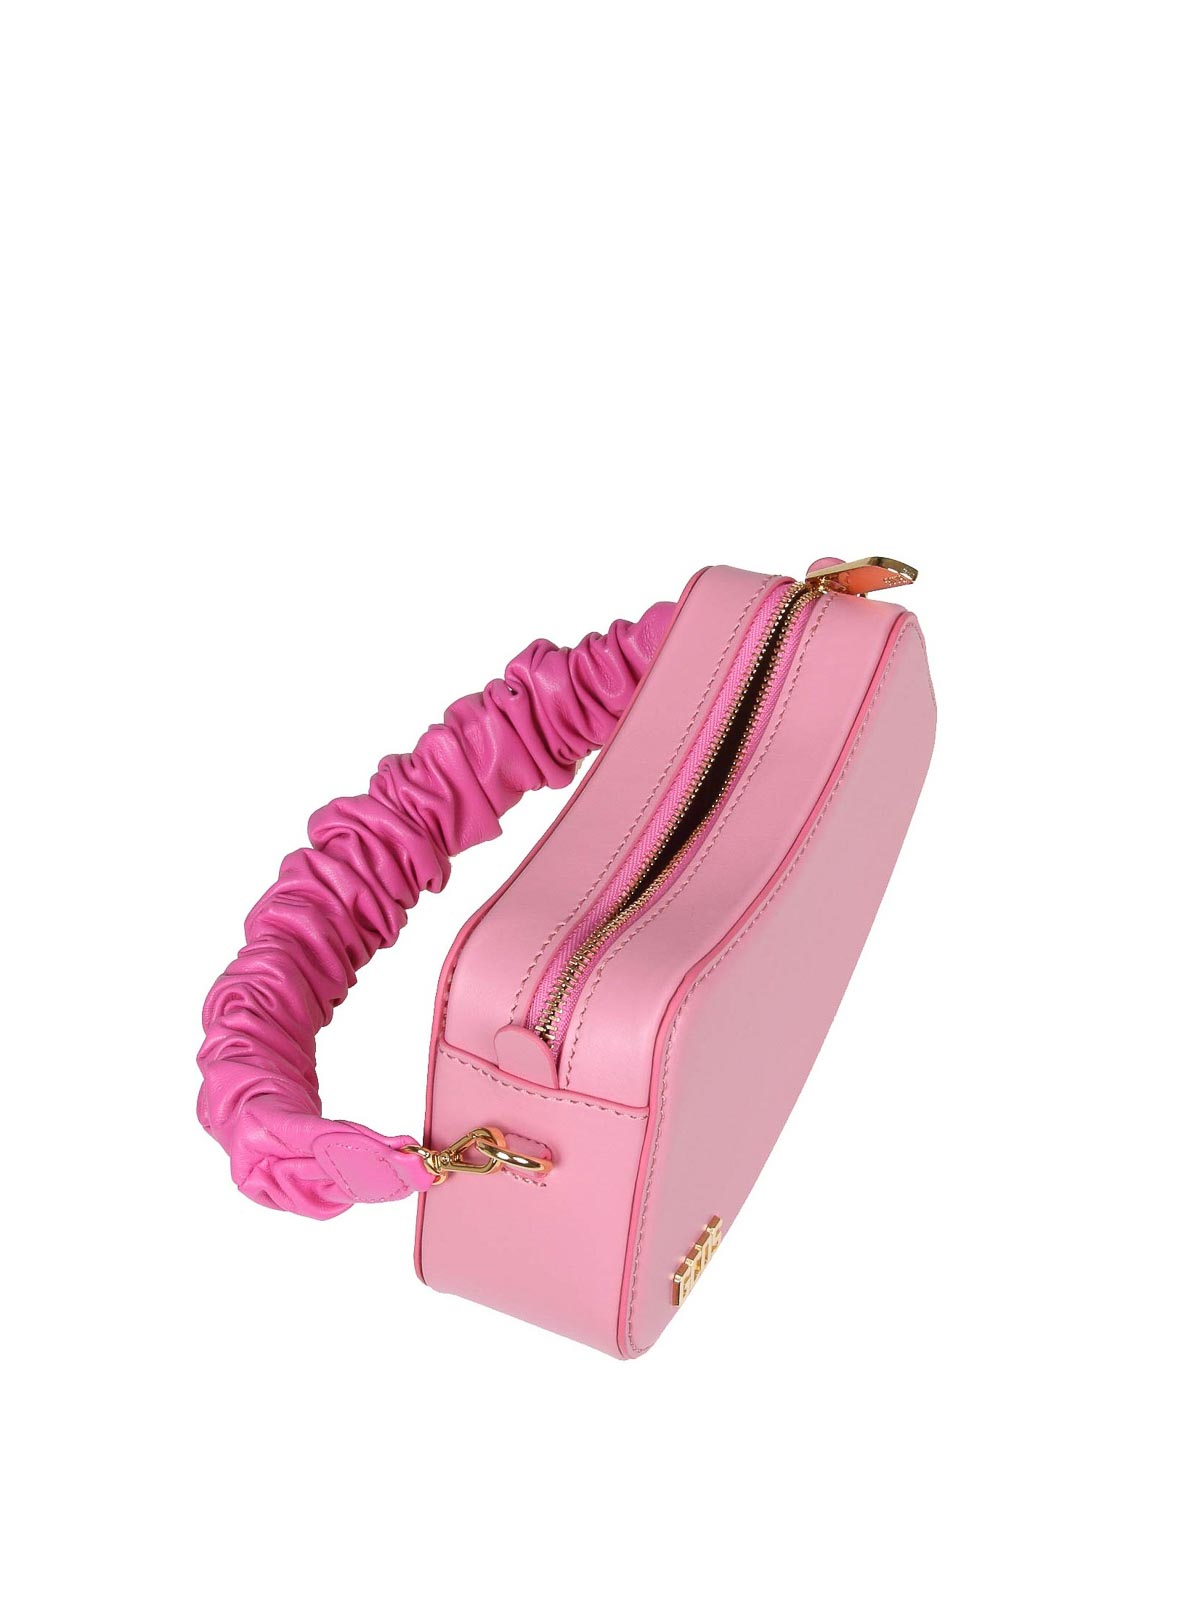 Pink Bags for Women, Shop Online